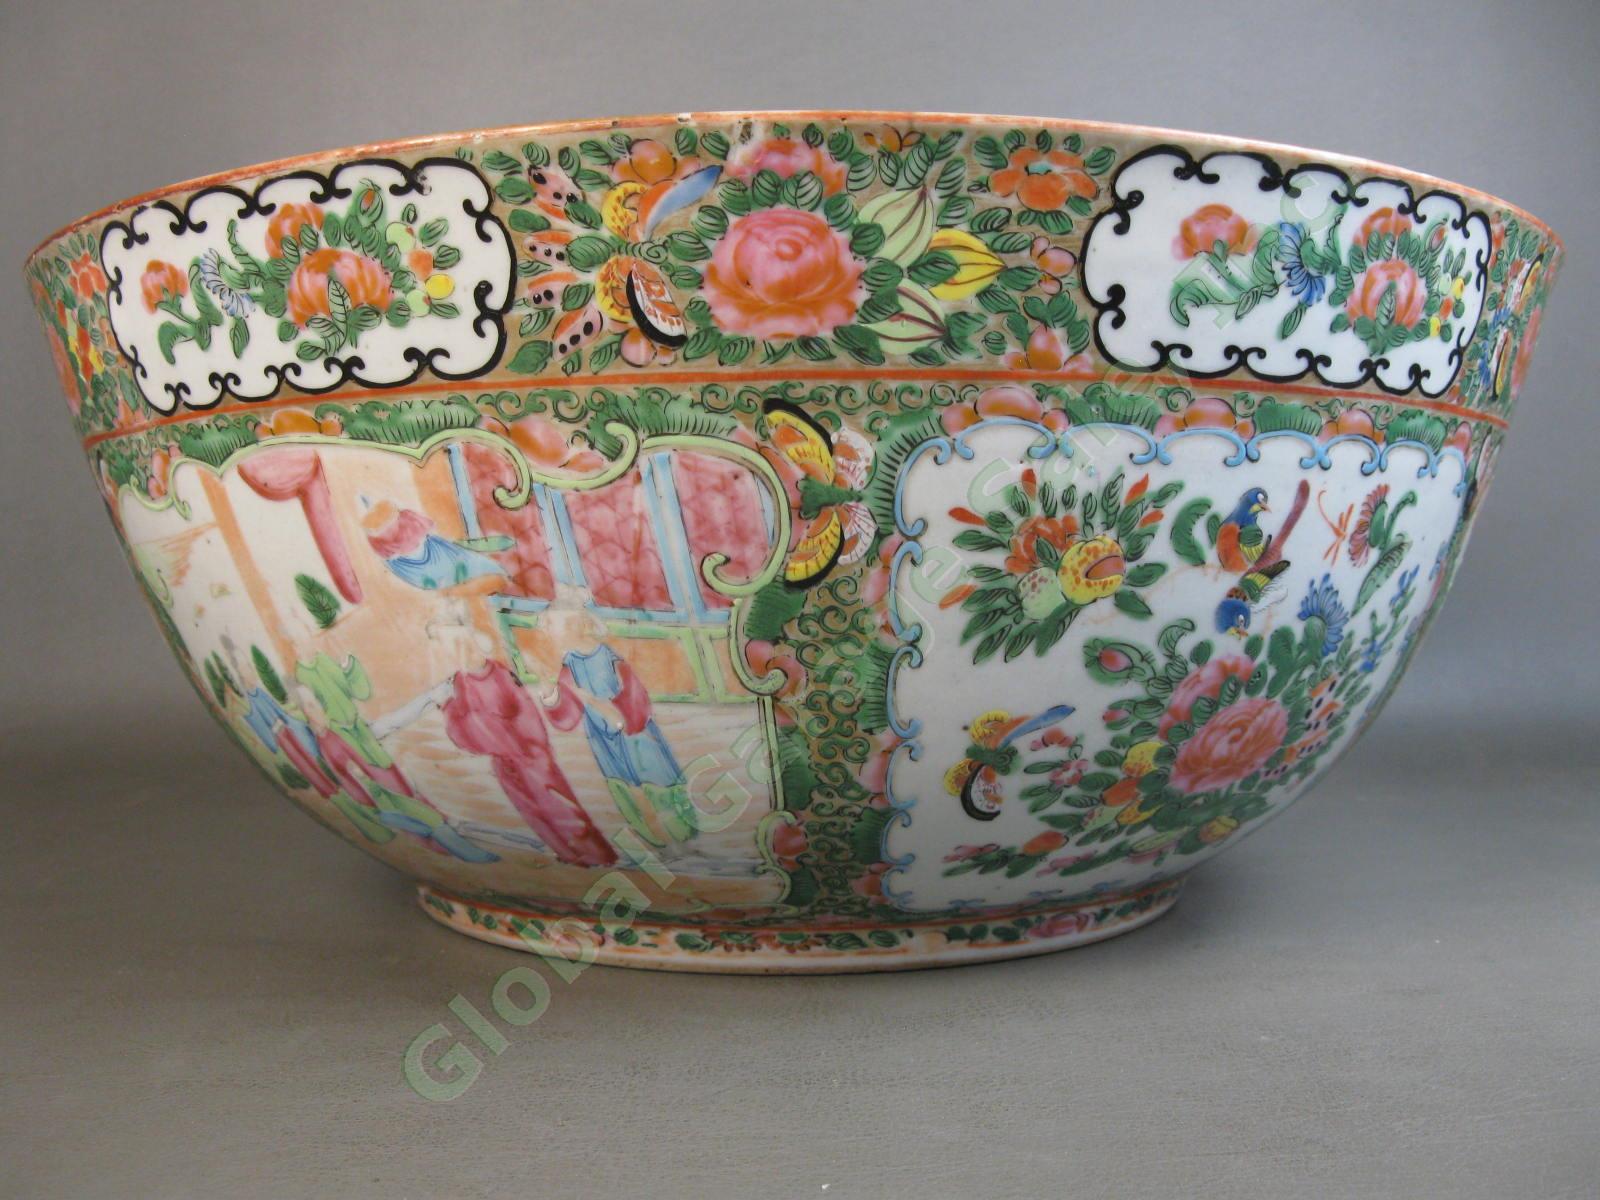 RARE Antique Chinese Early 19th C Large Famille Rose Medallion Punch Bowl 15" NR 5